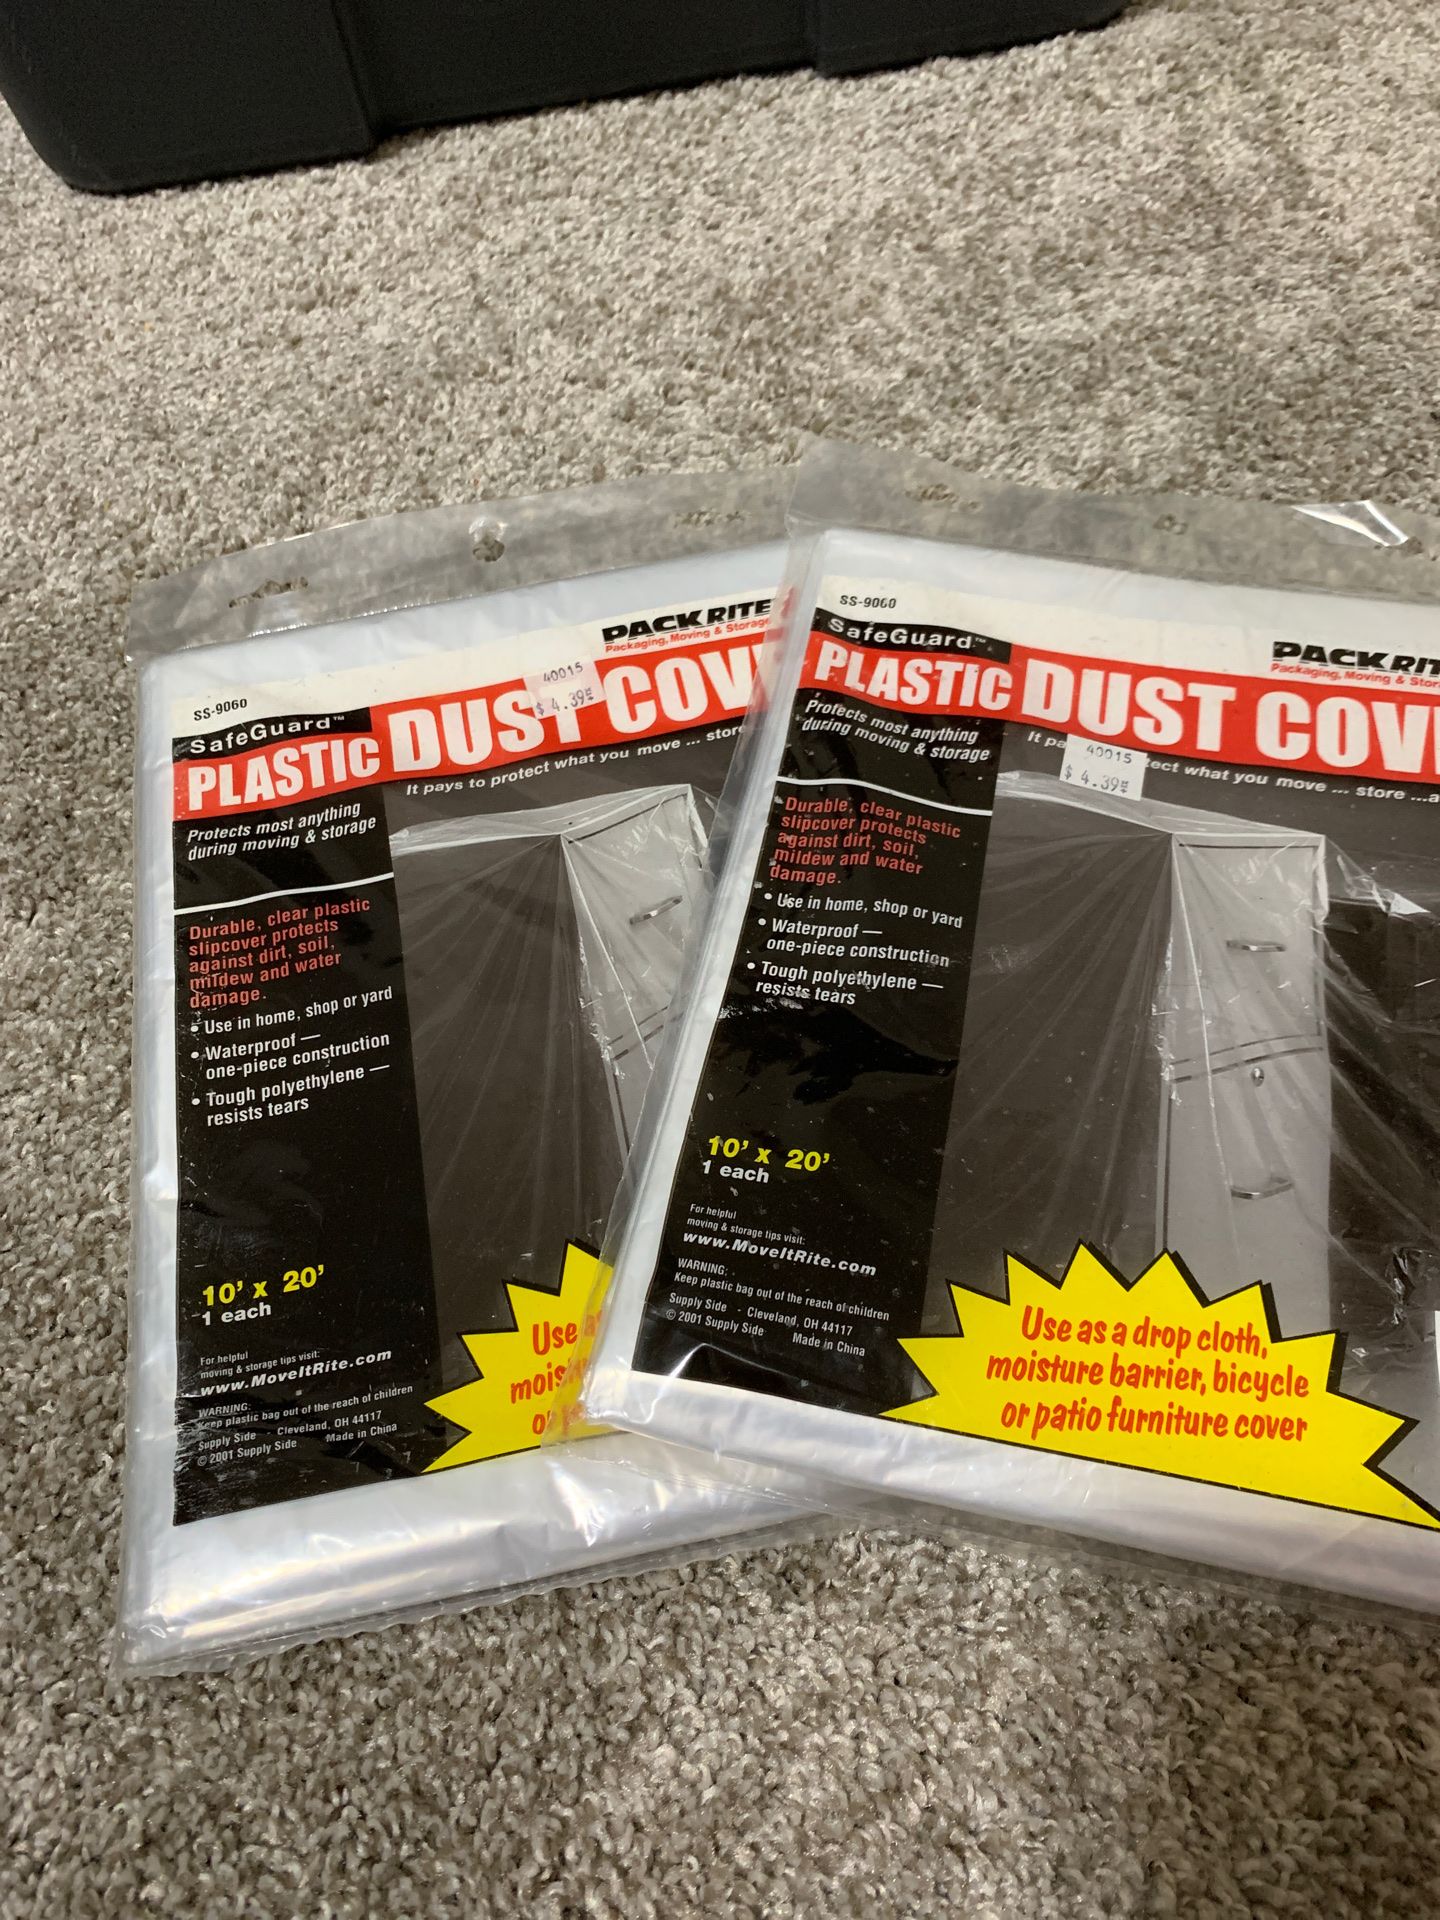 Two brand new dust plastic covers 10’x20’, both fro $6